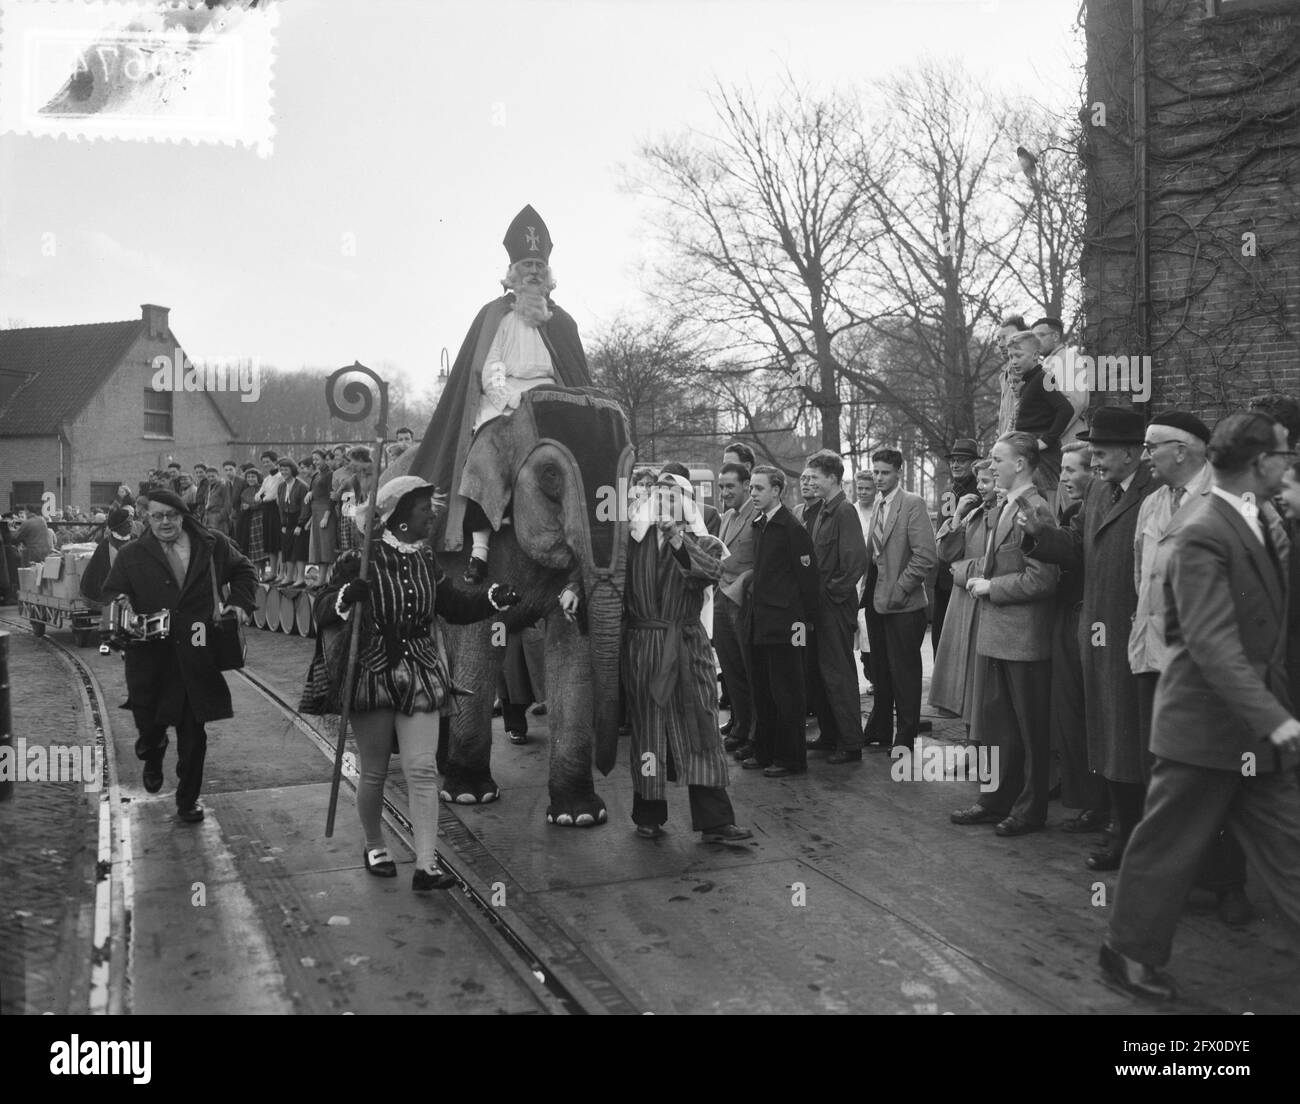 Saint Nicholas on elephant visits Chemical Factory Naarden, December 1, 1954, OLIFANTS, The Netherlands, 20th century press agency photo, news to remember, documentary, historic photography 1945-1990, visual stories, human history of the Twentieth Century, capturing moments in time Stock Photo